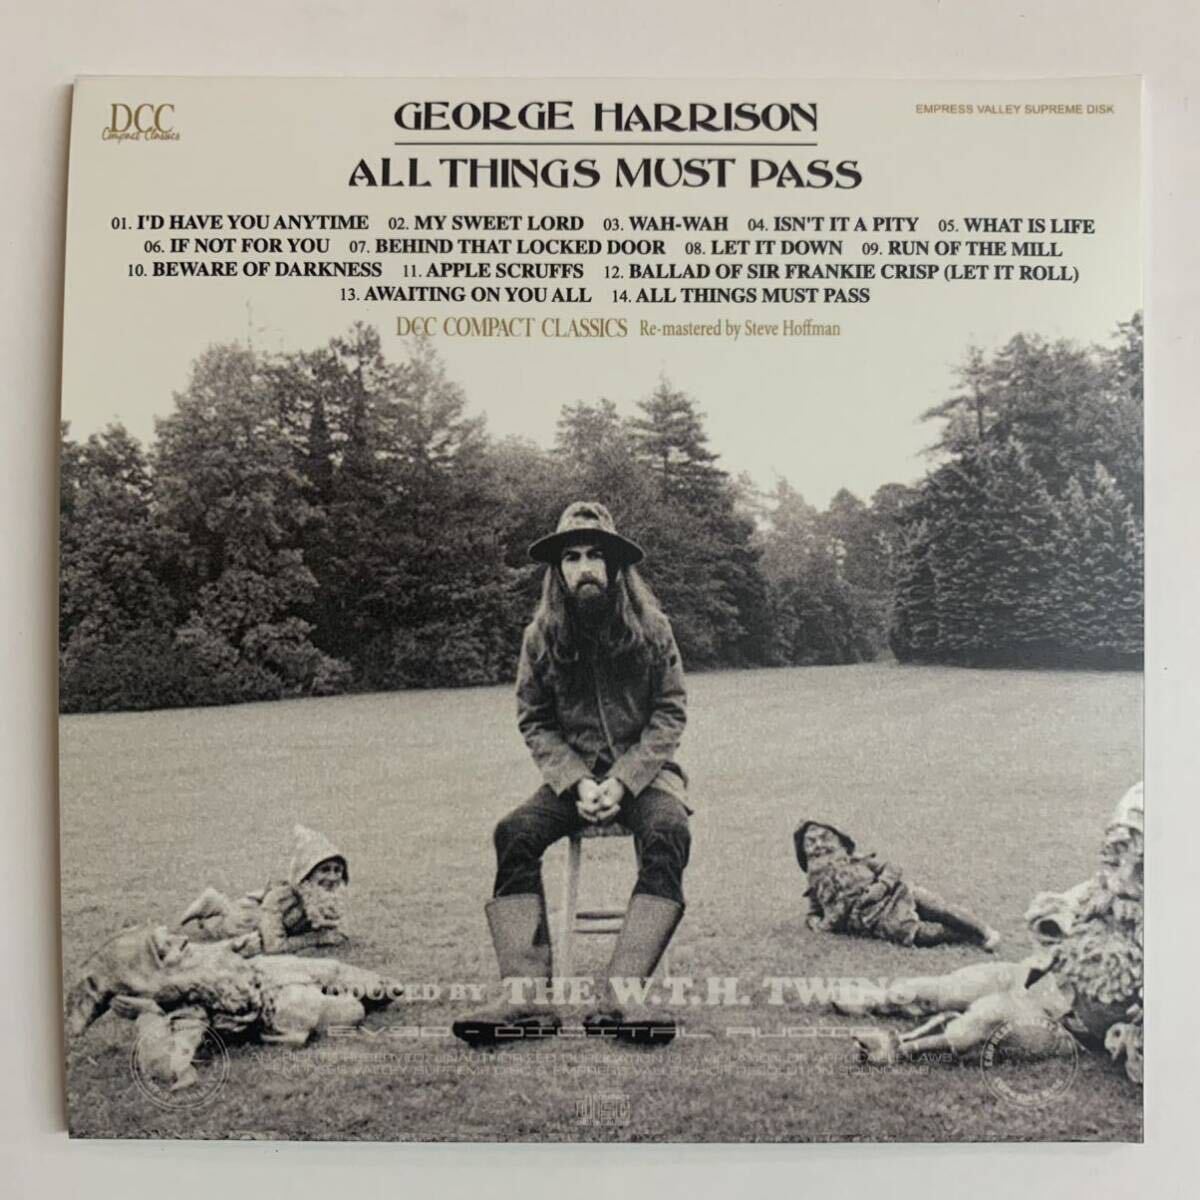 GEORGE HARRISON / ALL THINGS MUST PASS DCC COMPACT CLASSICS Remastered by Steve Hoffman (CD) これは嬉しい紙ジャケット仕様★の画像4